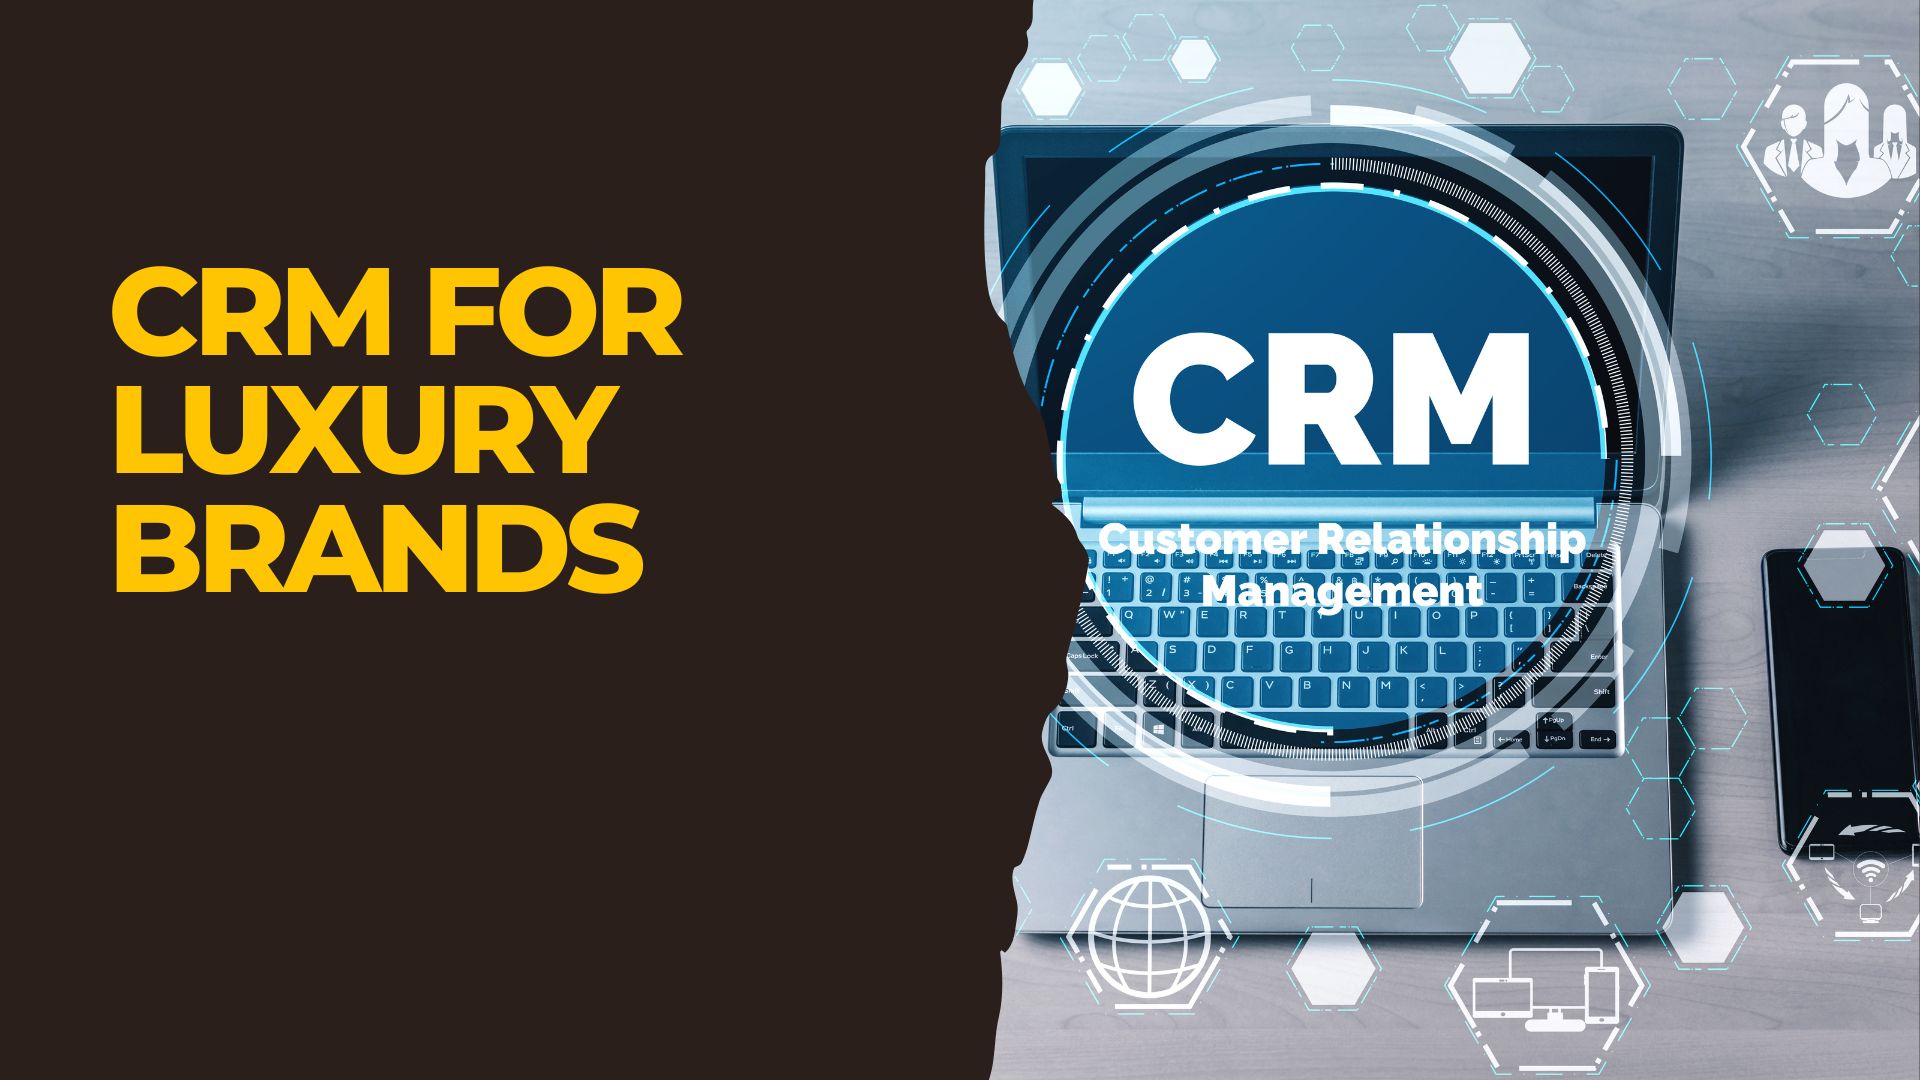 Crm for Luxury Brands